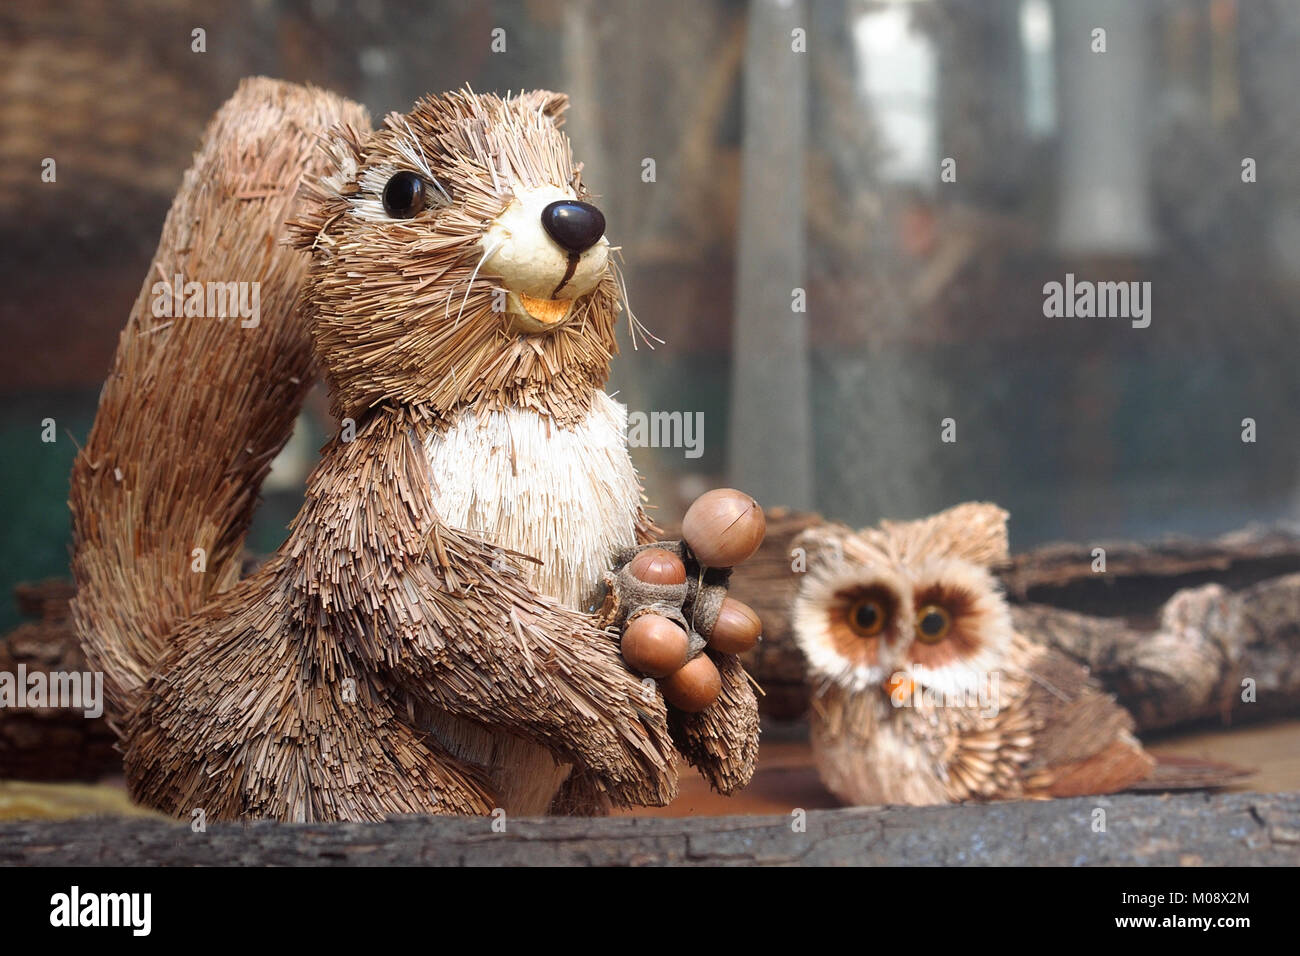 Wooden beaver on sale in a street market. Stock Photo